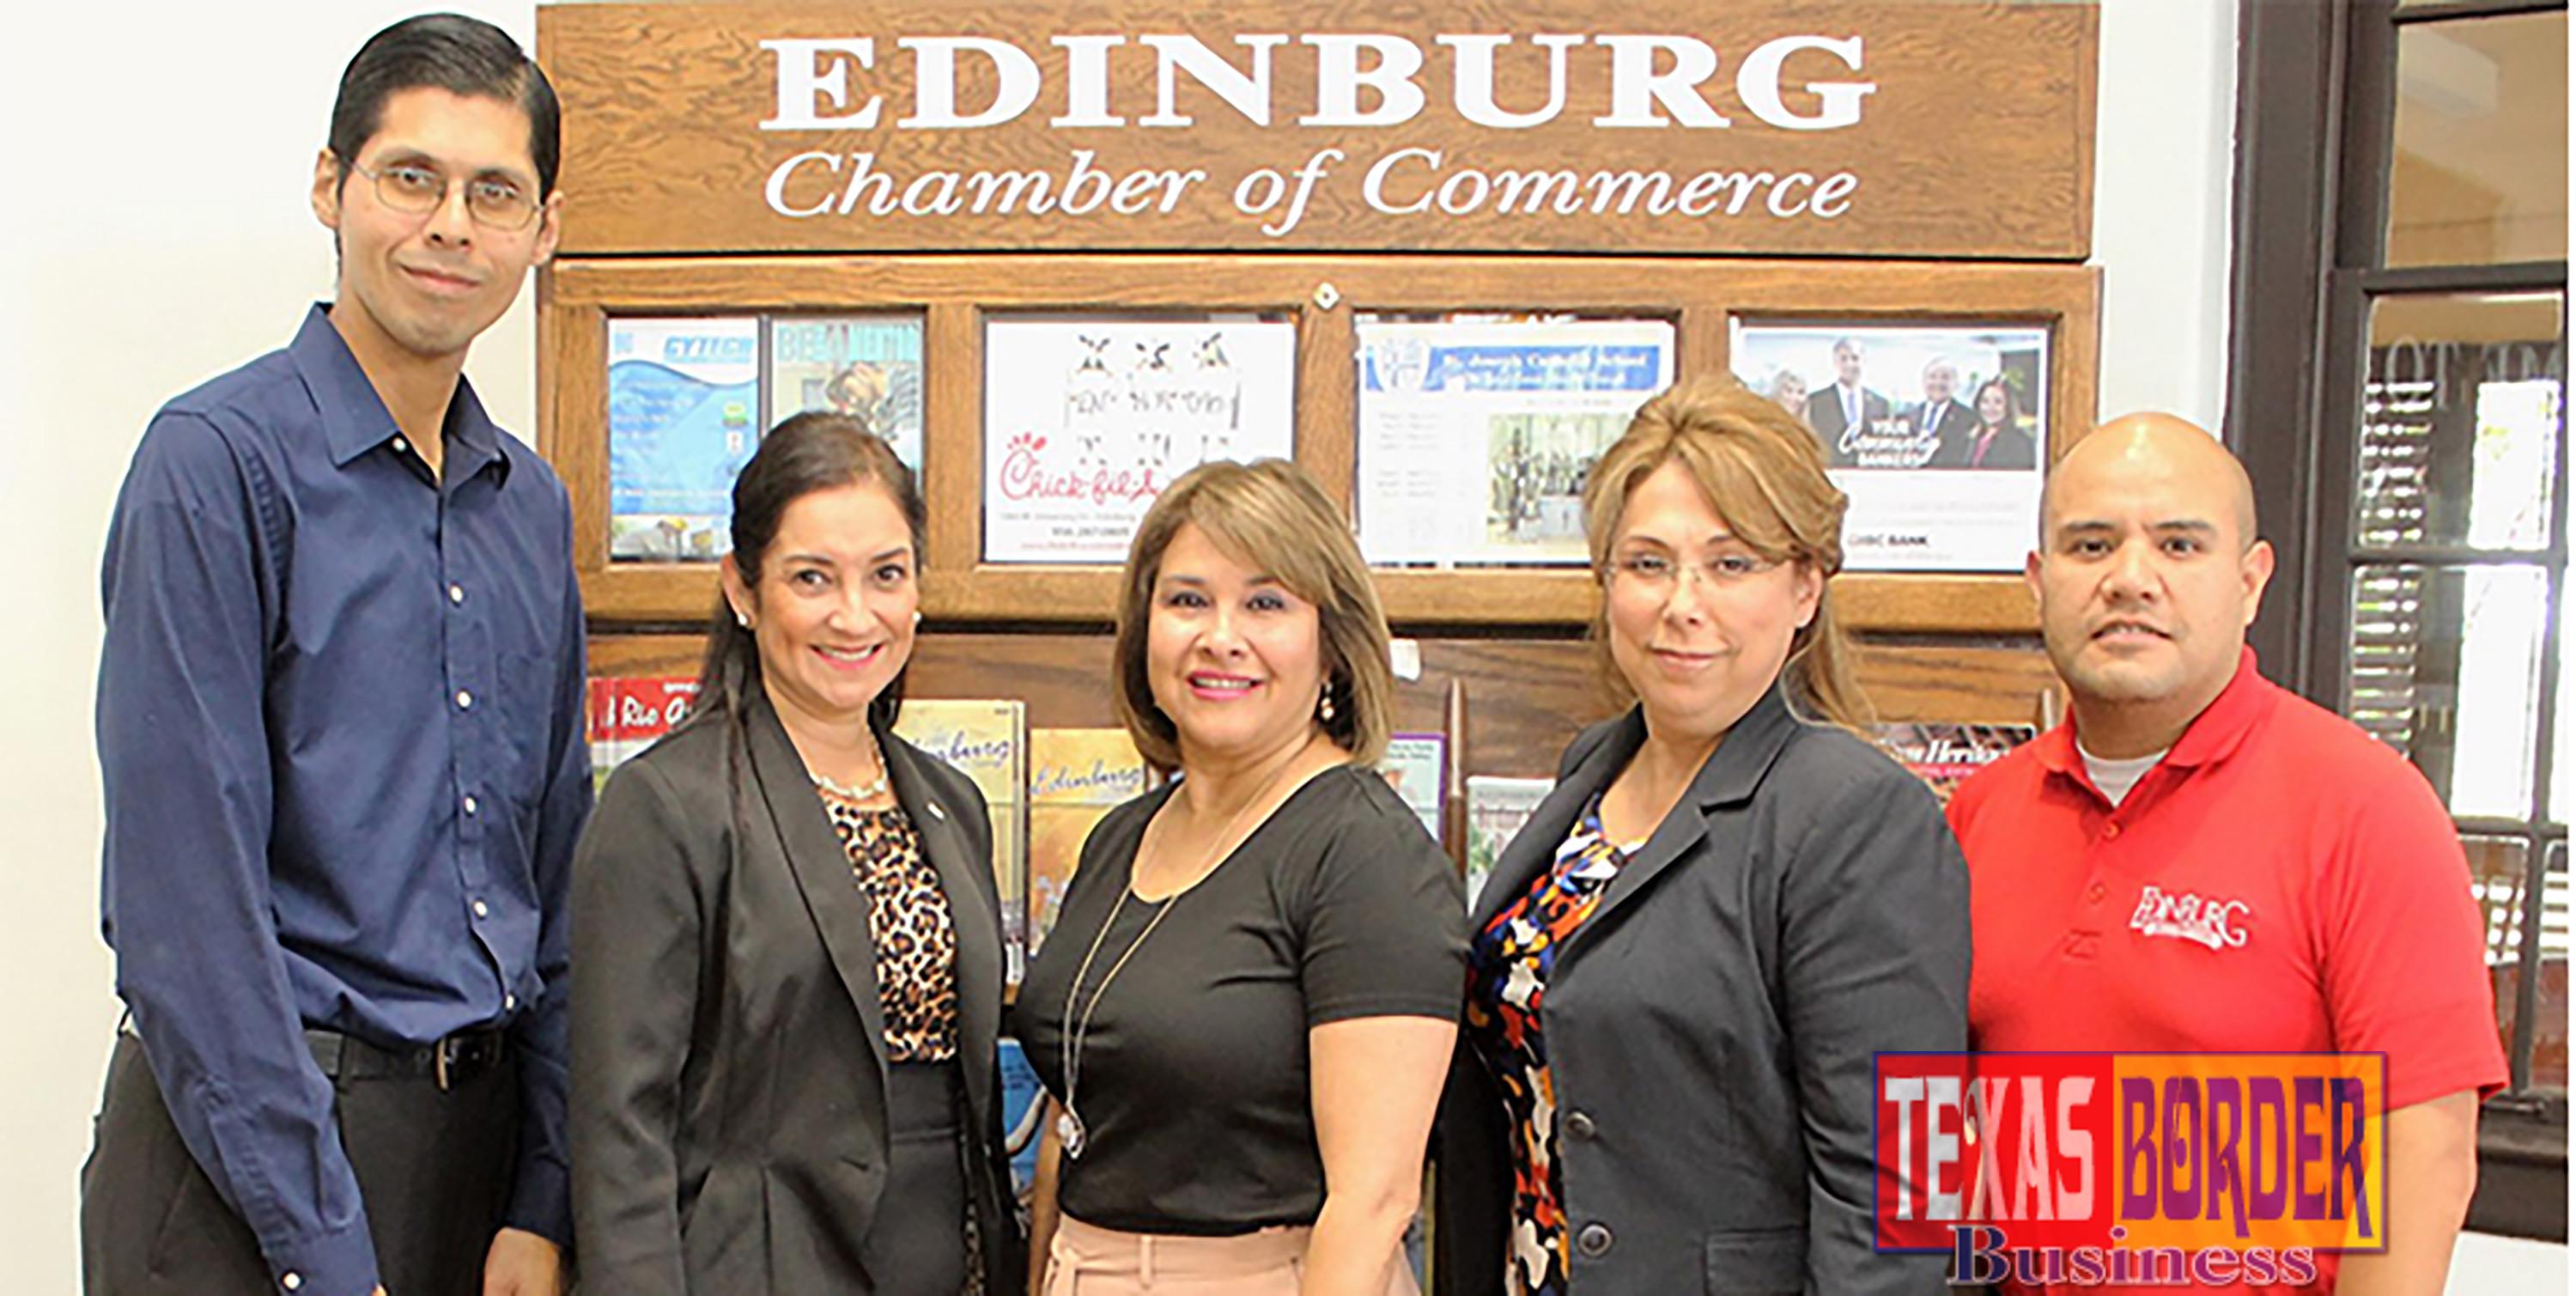 Pictured promoting the Power Punch @ Lunch is Martin Rivas (Director of Membership- Edinburg Chamber of Commerce), Diana ValVerde (Farmers Insurance- Recruiter), Norma Villarreal (Farmers Insurance- District 40 Manager), Mary Watson (Farmers Insurance- Agent) and Ronnie Larralde (Director of Marketing, Edinburg Chamber of Commerce). The Power Punch at Lunch is set for Wednesday, June 22, 2016, from 11:30am –1:00pm.